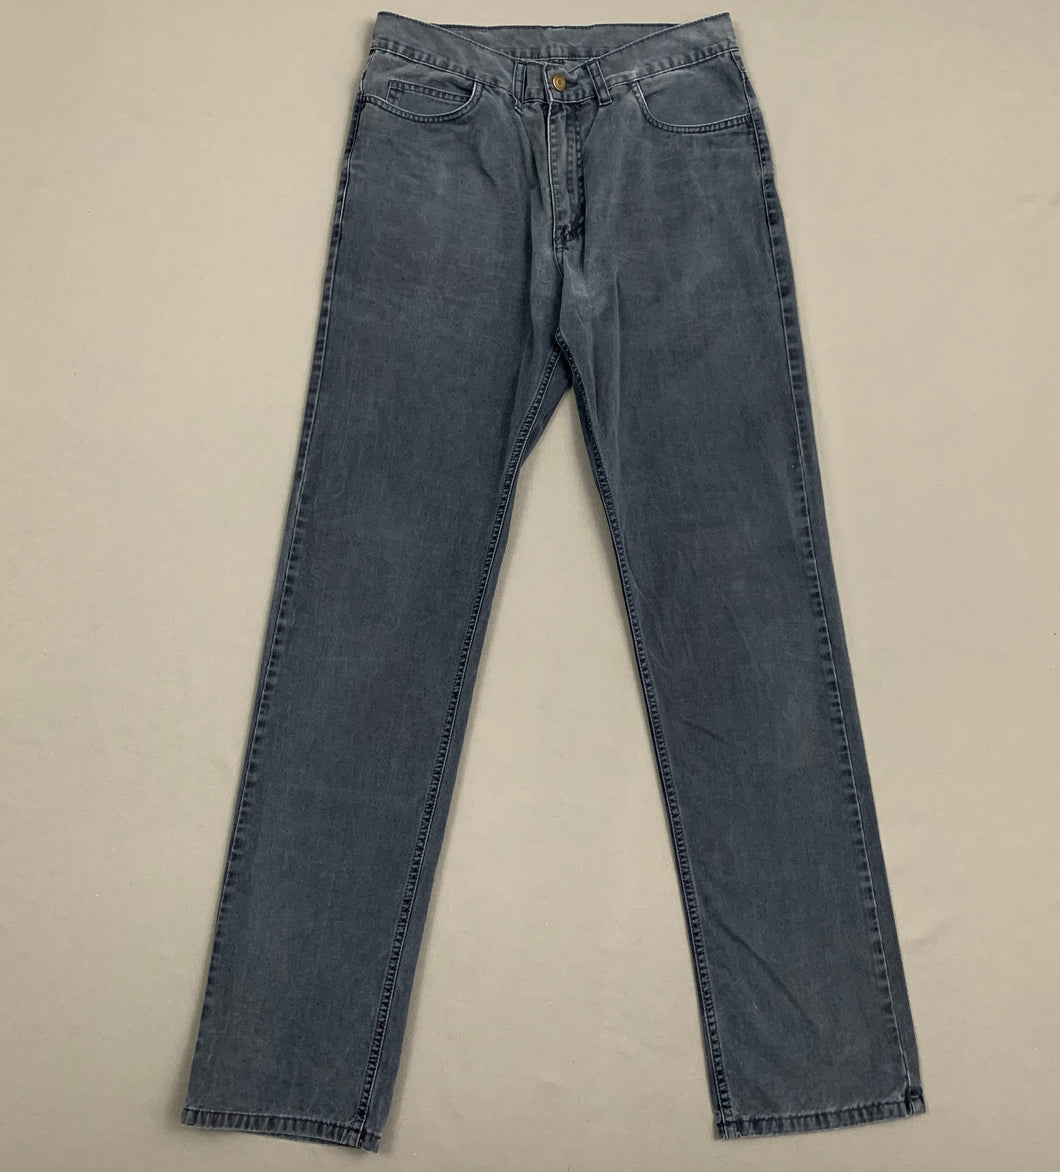 CORDINGS of Picadilly JEANS - Straight Leg - Mens Size Waist 32